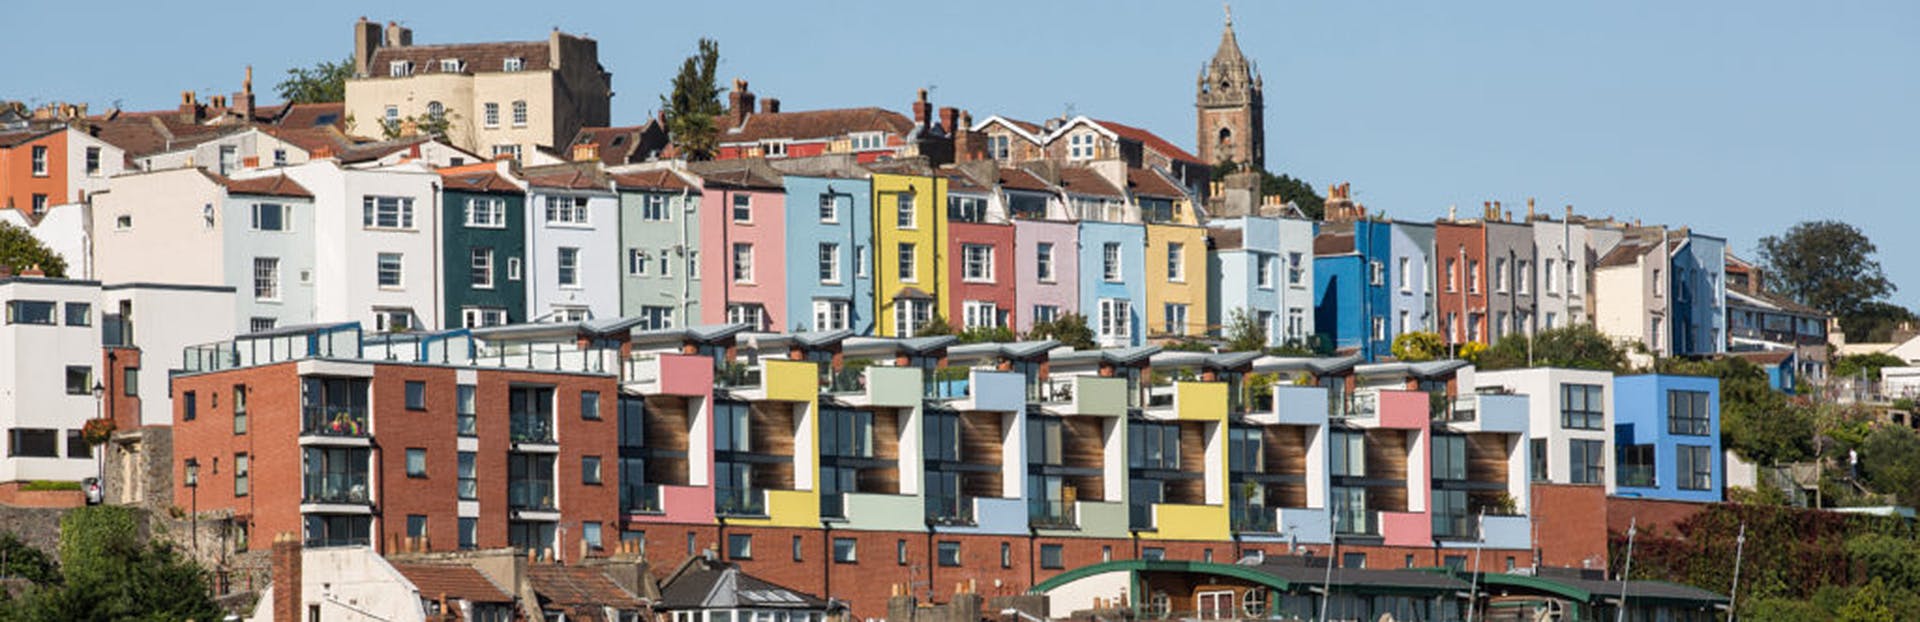 Explore the best of Old City Bristol on a self guided